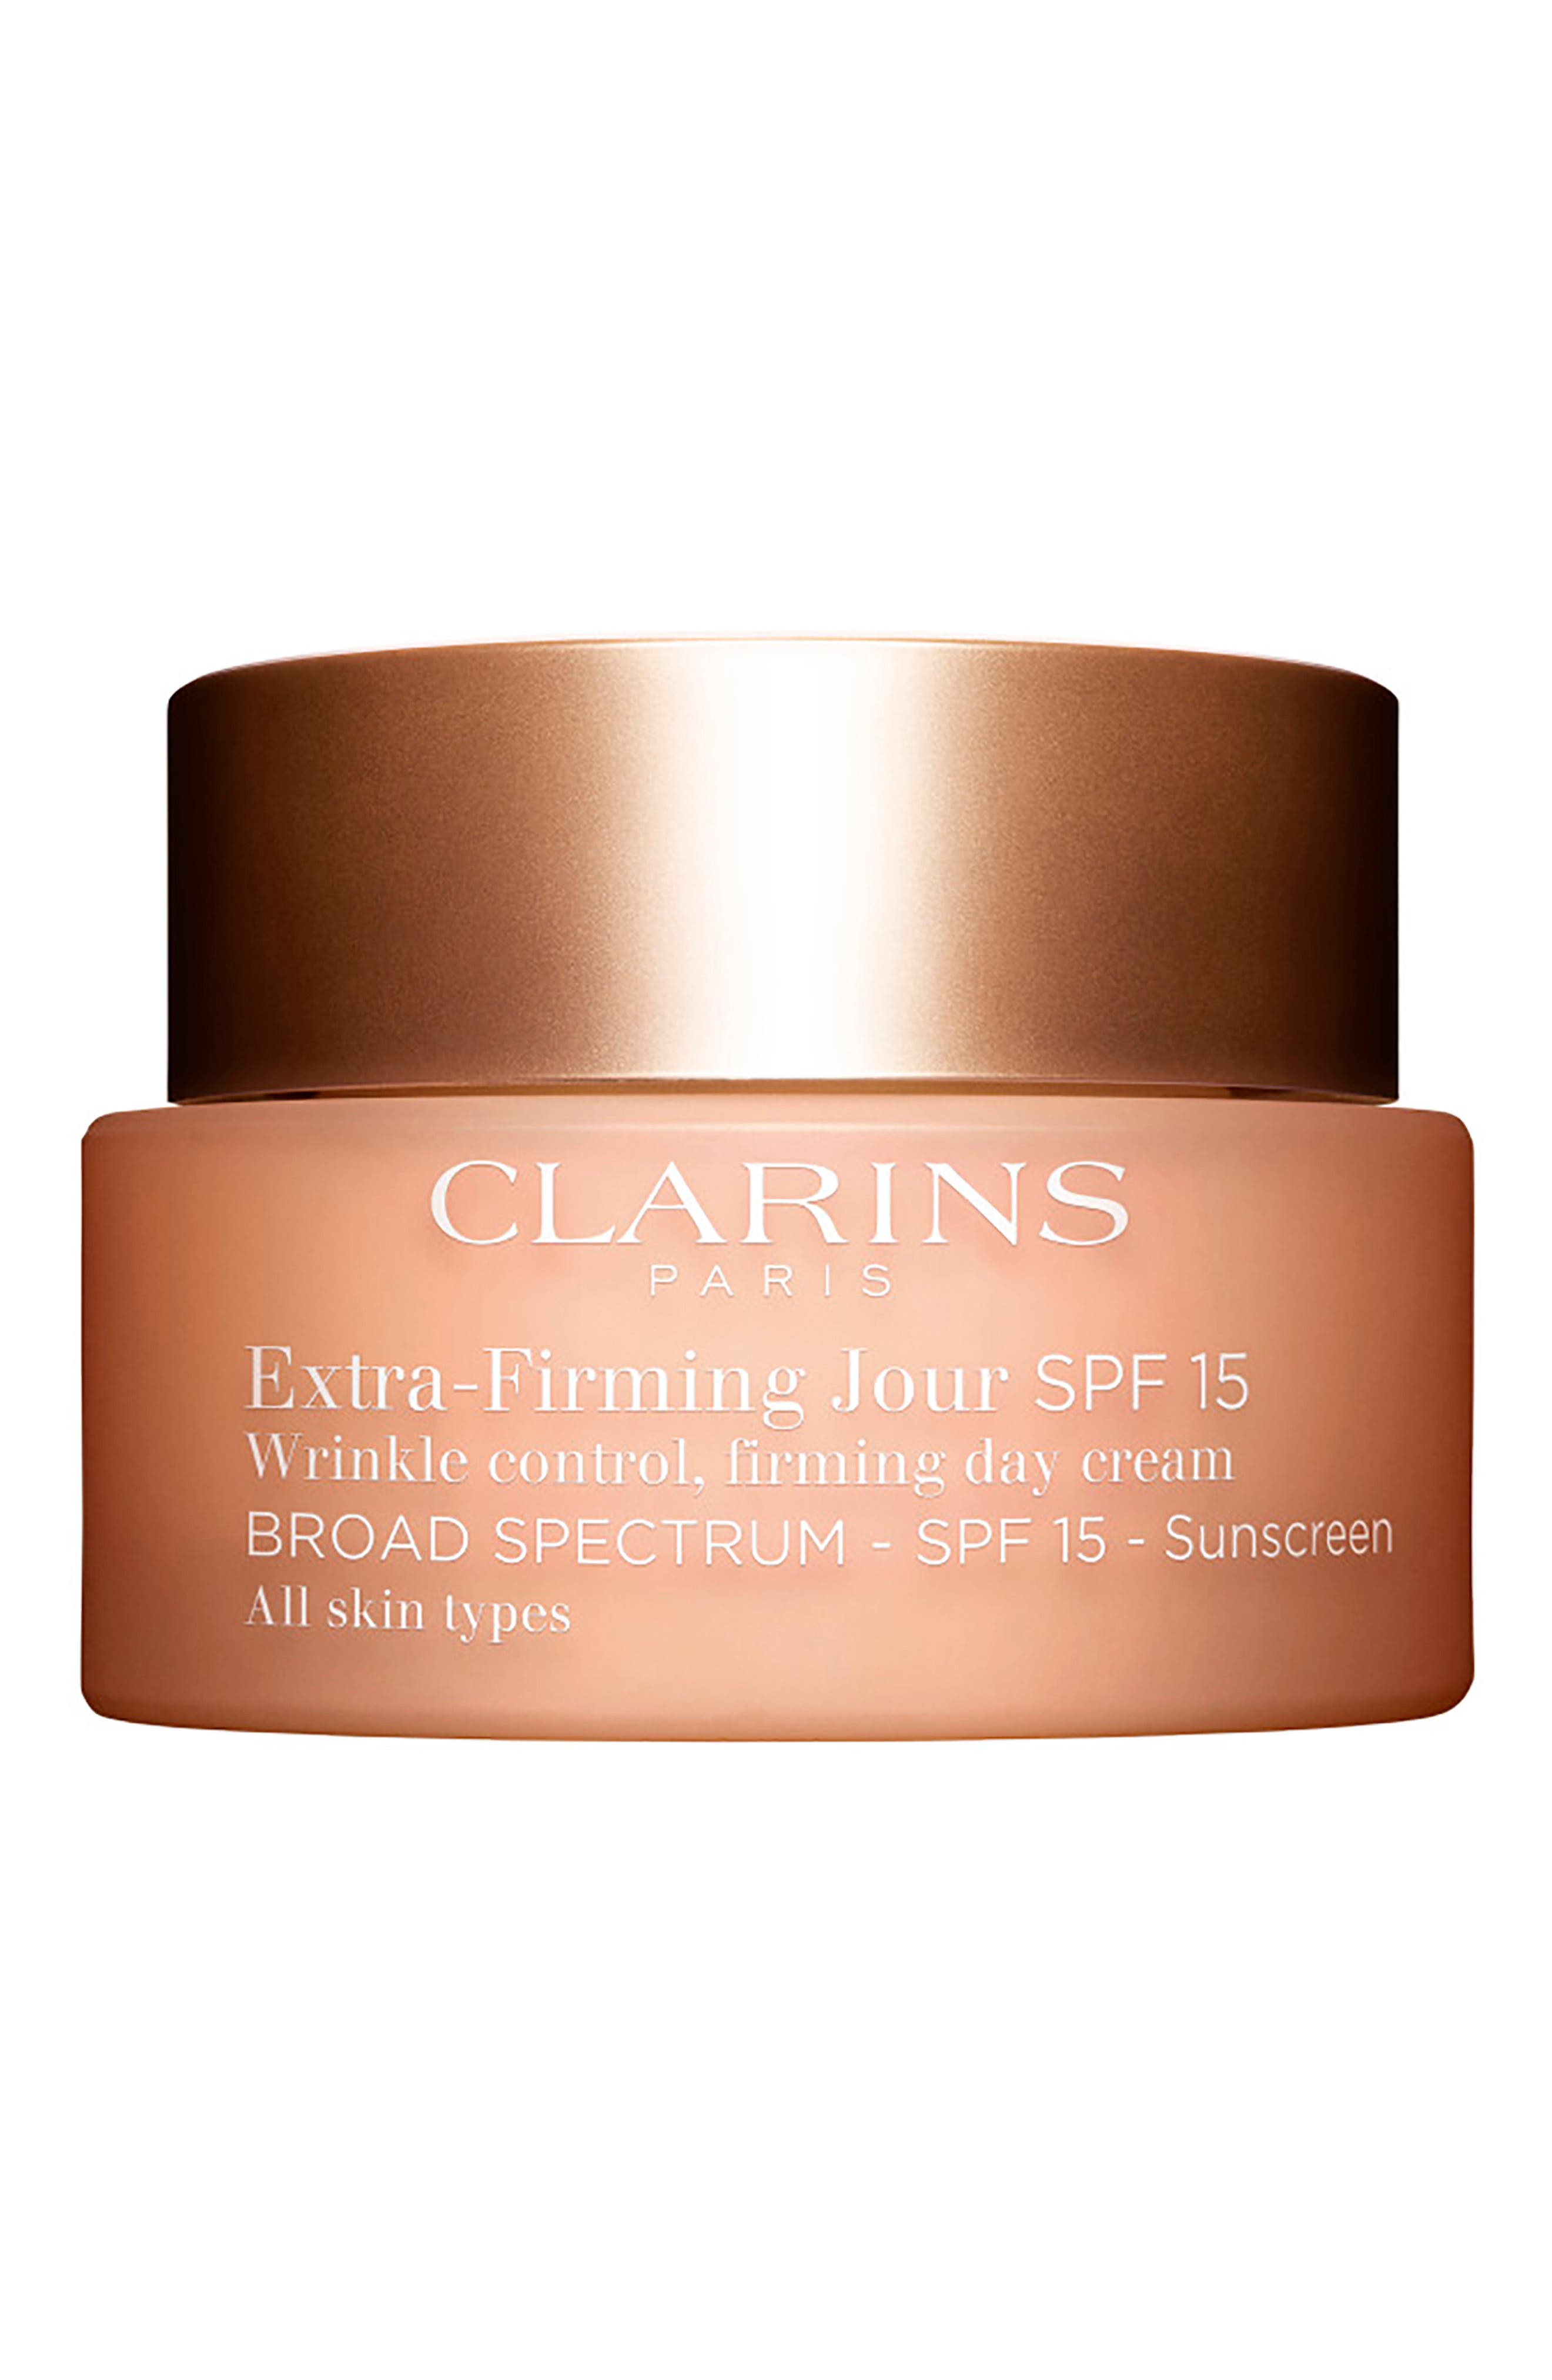 Clarins Extra-Firming Day Cream SPF 15 - All Skin Types